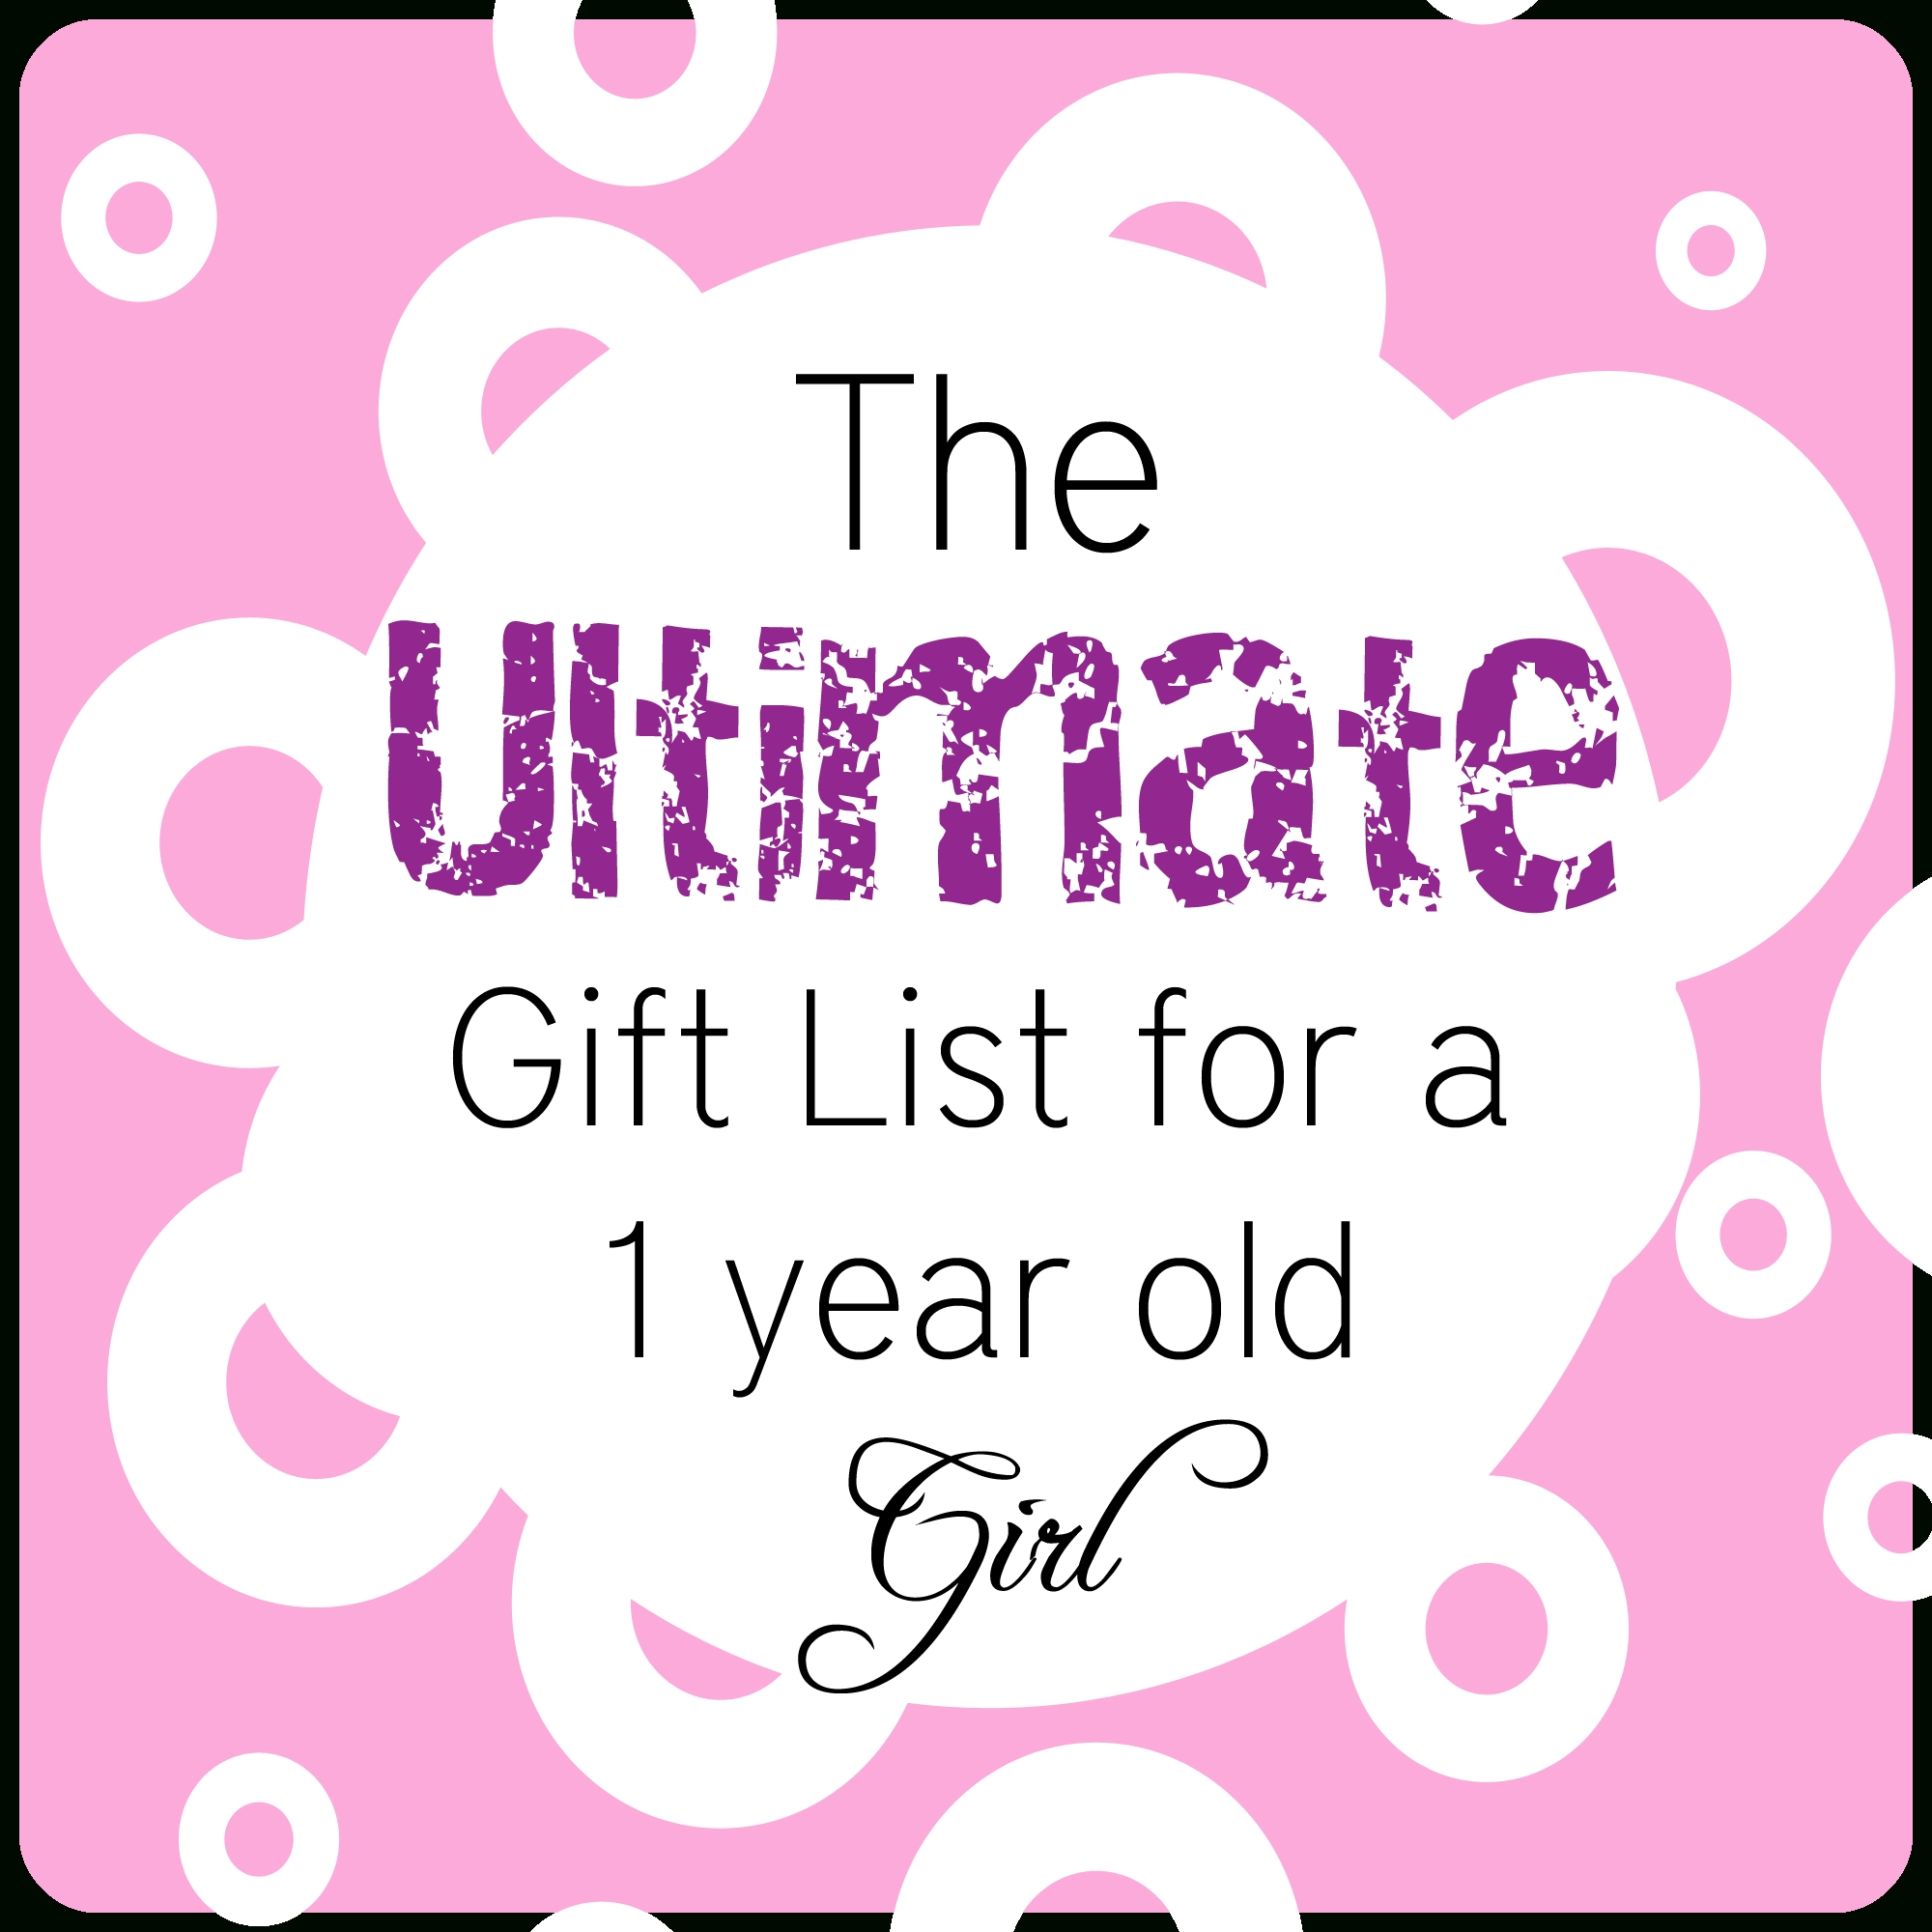 10 Cute Gift Ideas For A One Year Old Baby Girl the ultimate gift list for a 1 year old girlwww thepinningmama 3 2022